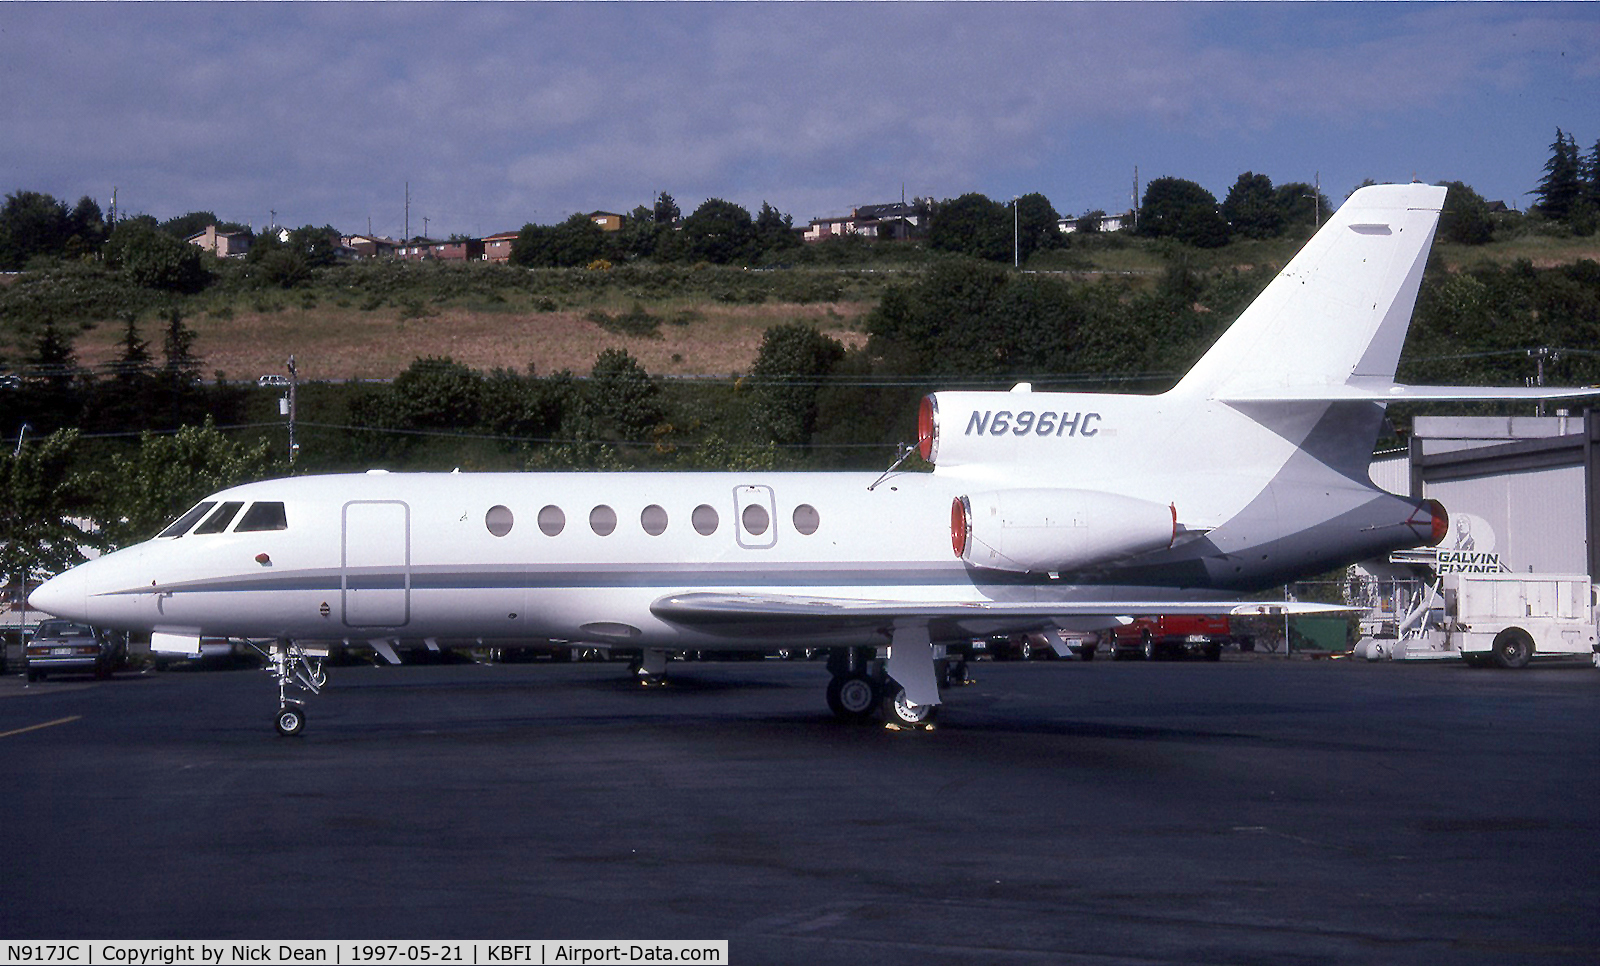 N917JC, 1994 Dassault Falcon 50 C/N 250, KBFI (Seen here as N696HC this airframe is currently registered N917JC as posted)